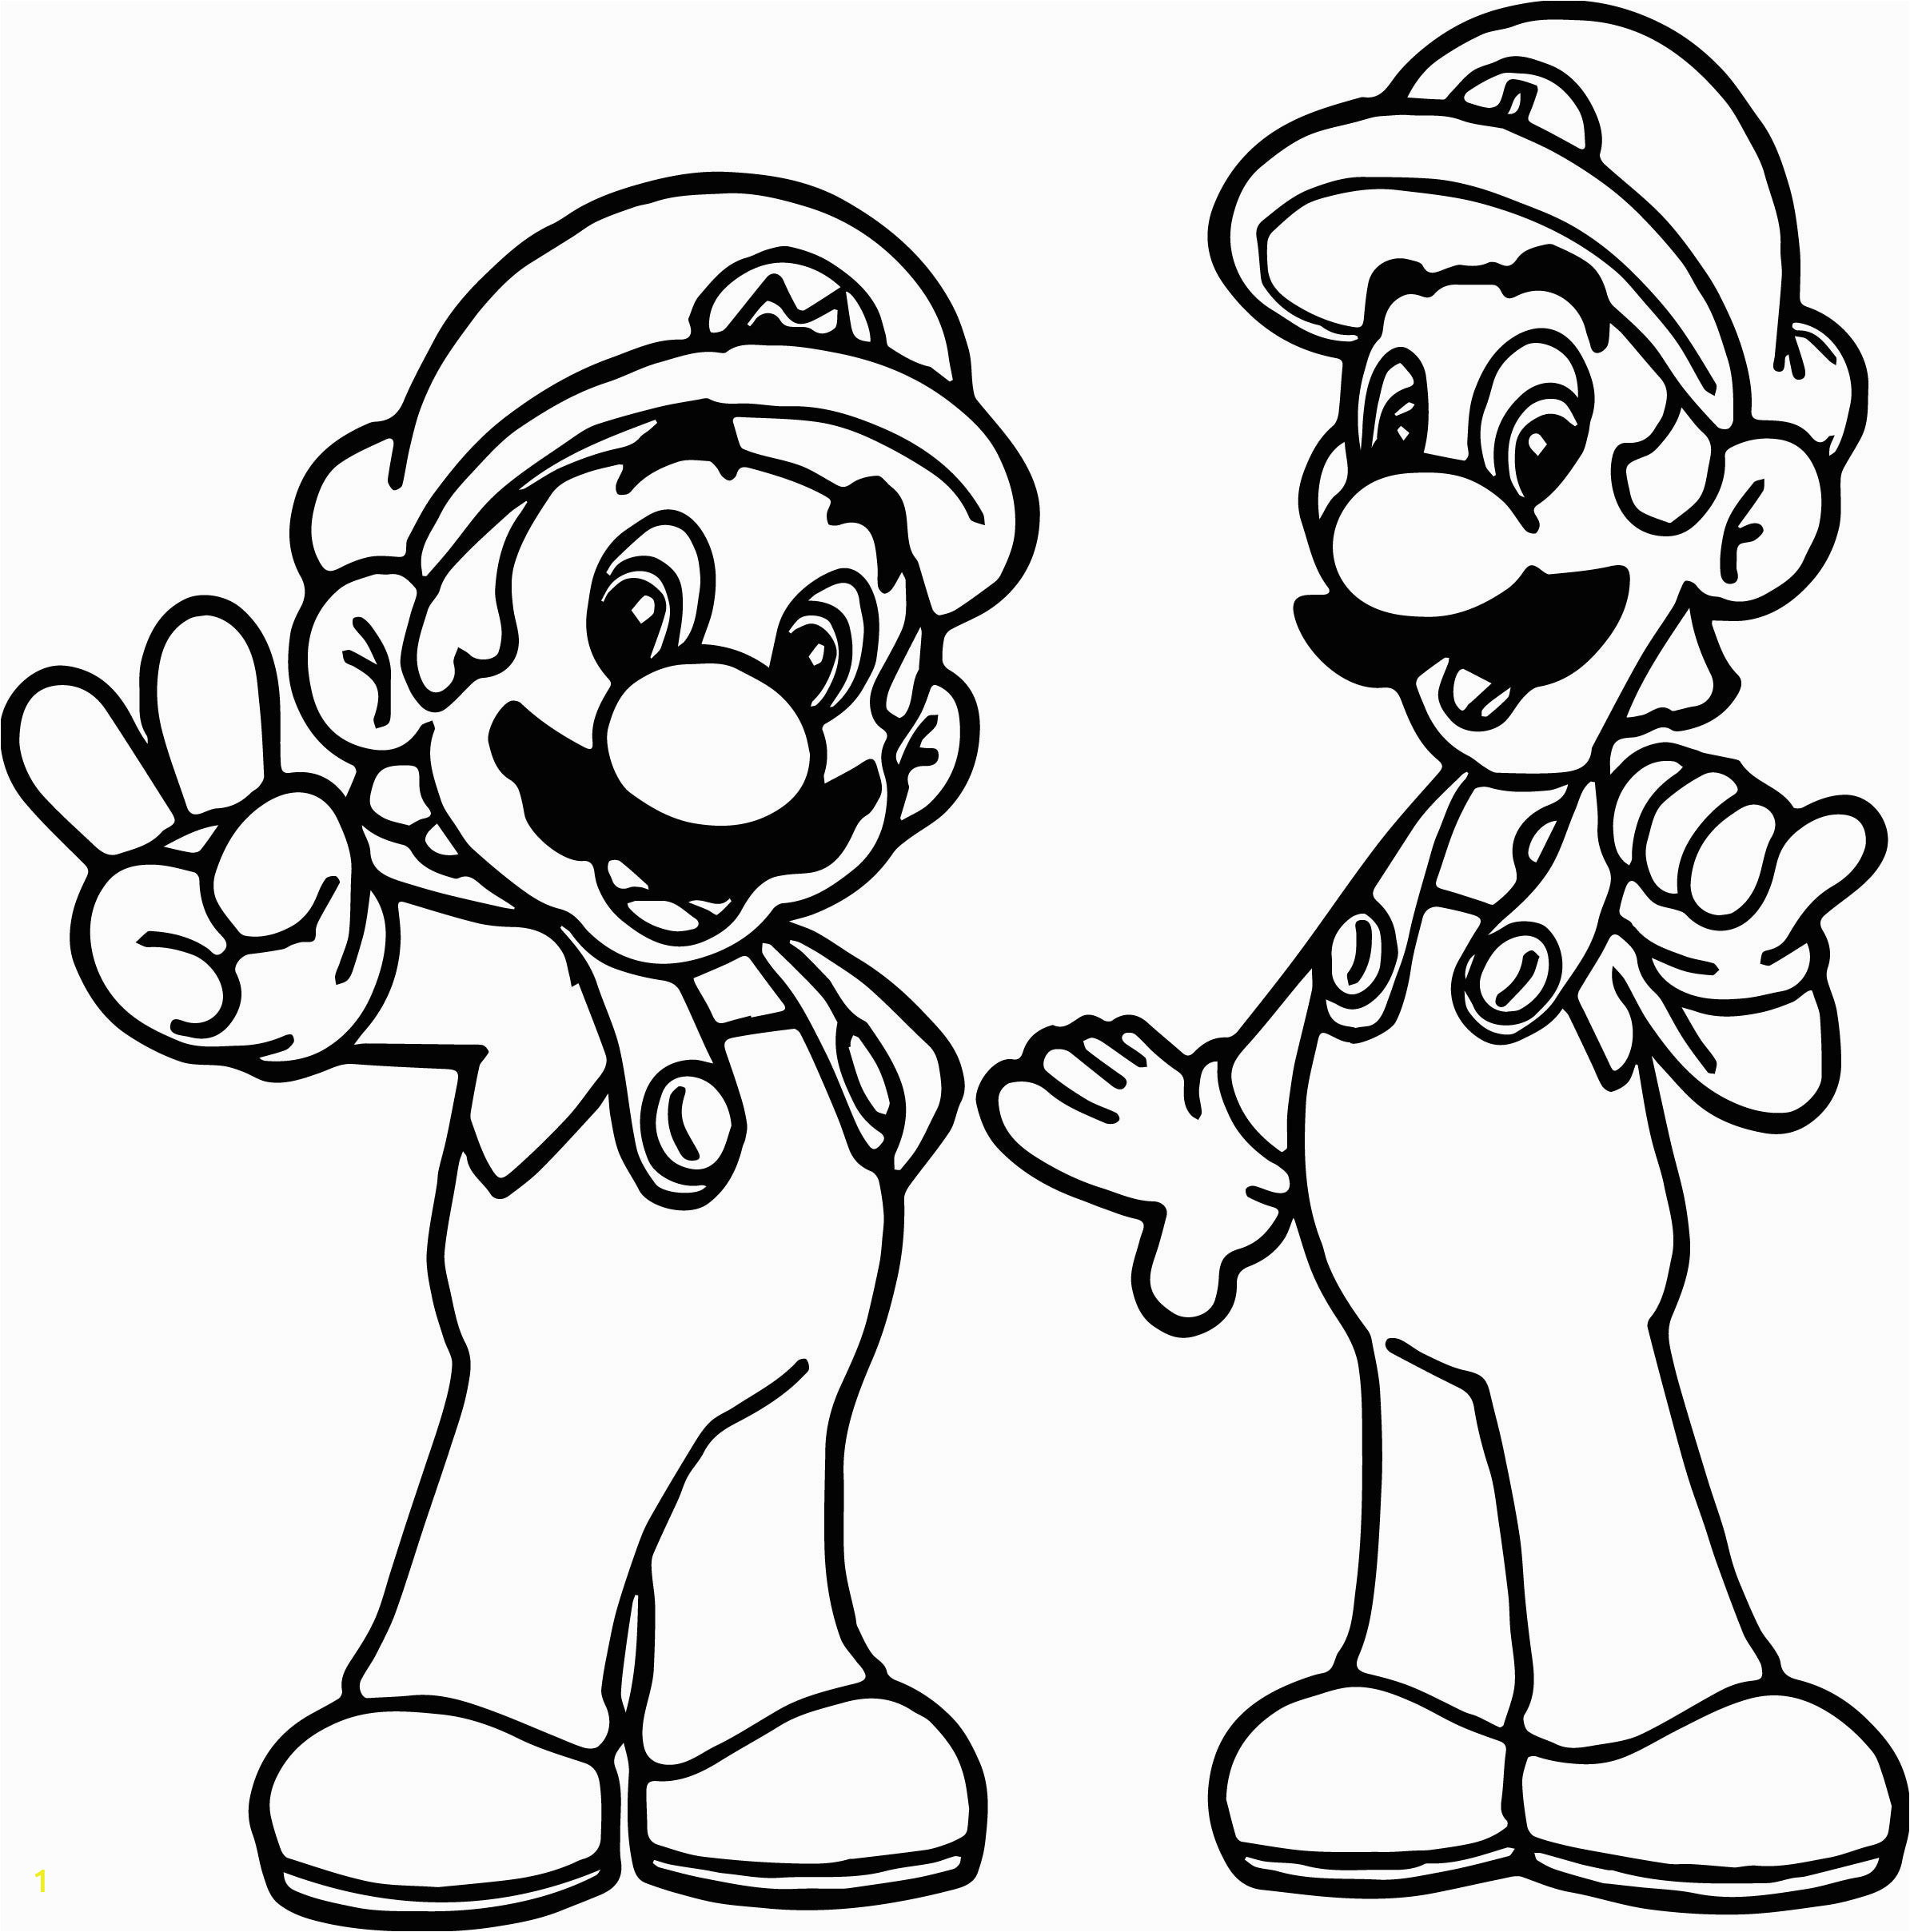 Free Printable Mario and Luigi Coloring Pages Luigi Coloring Pages at Getcolorings